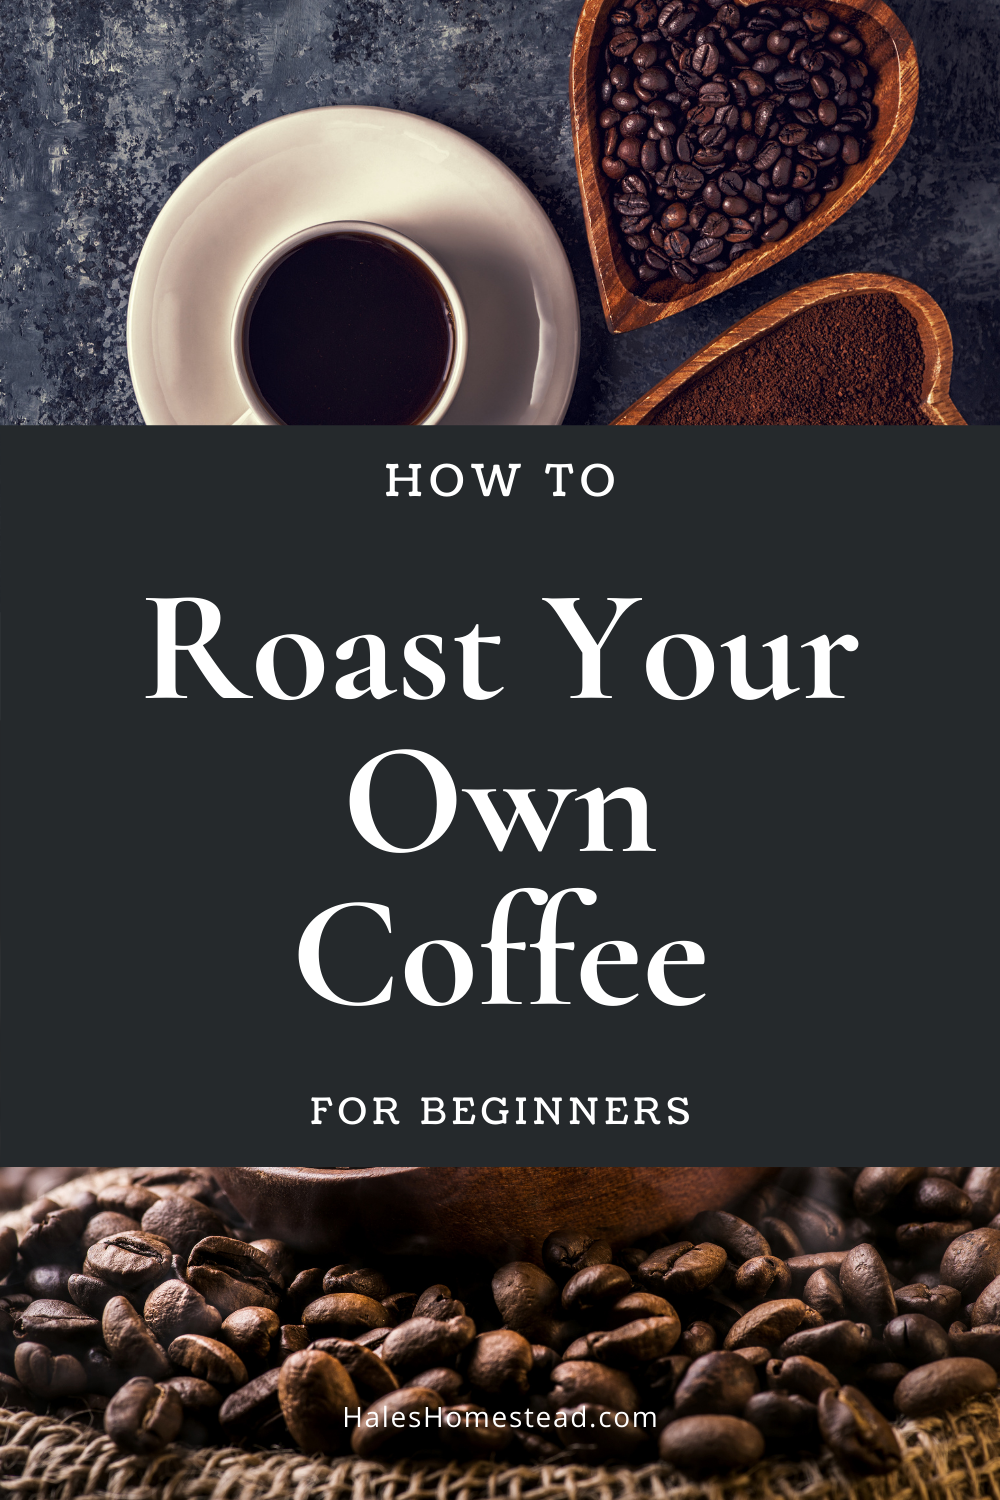 Can you make your own coffee beans?